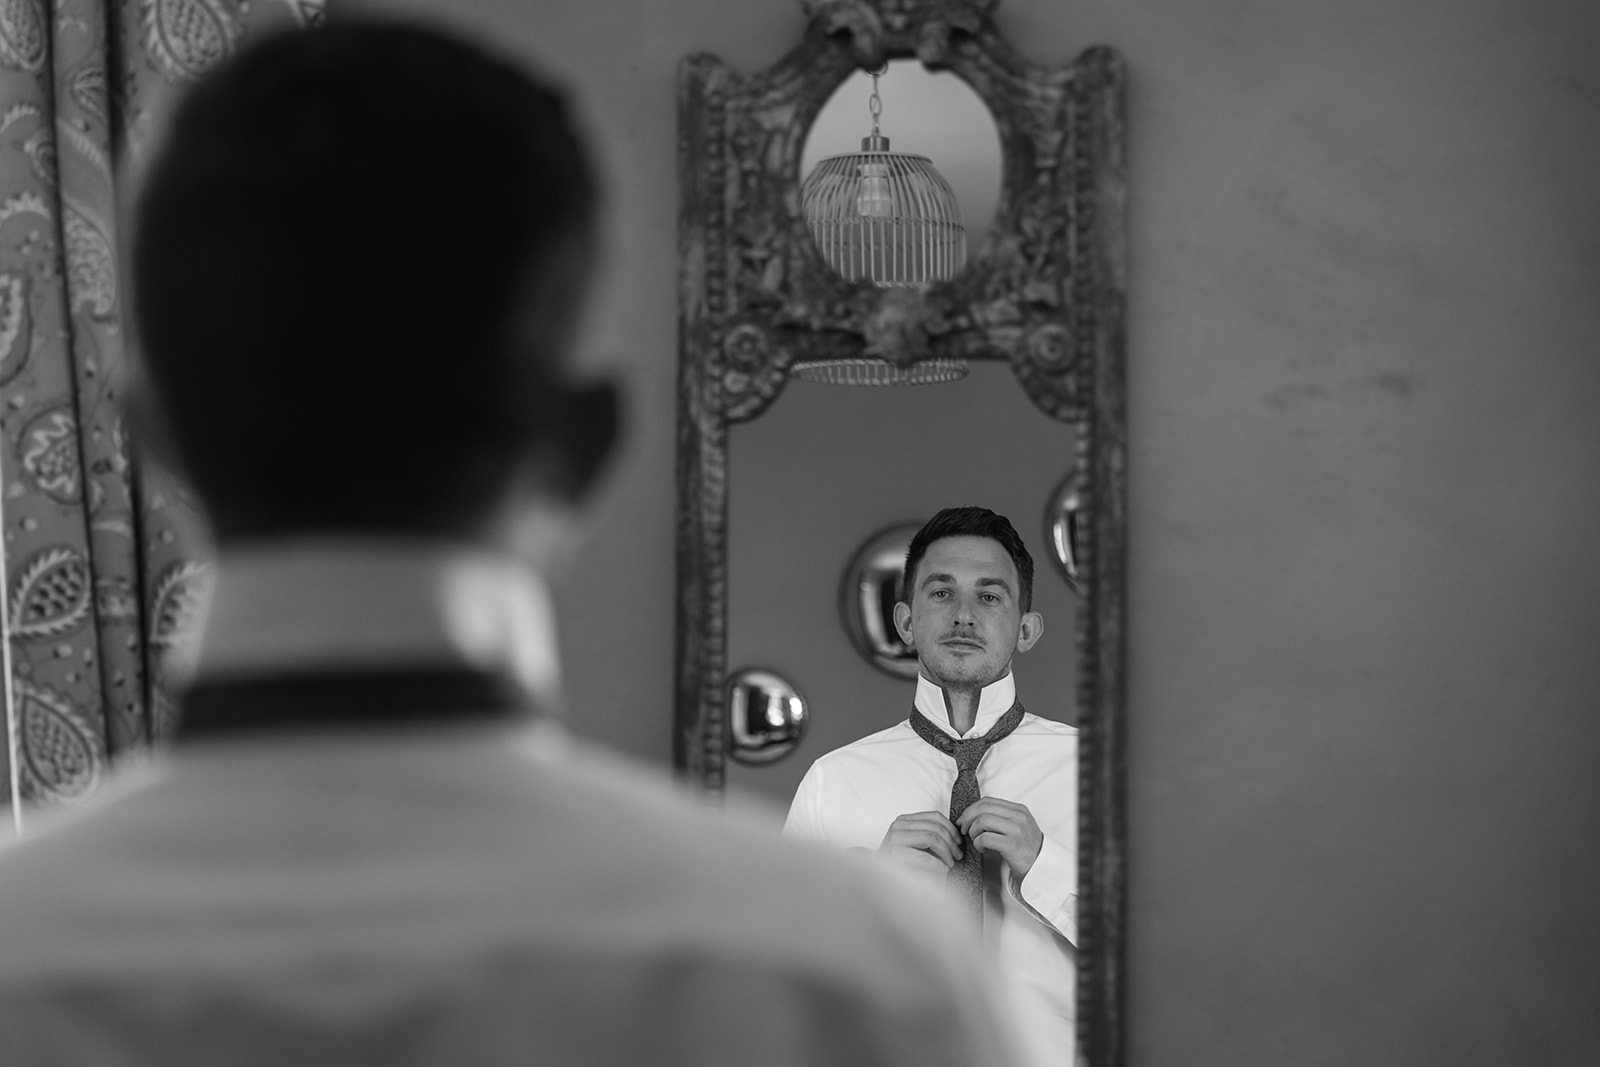 Groom getting ready at a France Destination Wedding. Photography and Videography by Olive Joy Photography